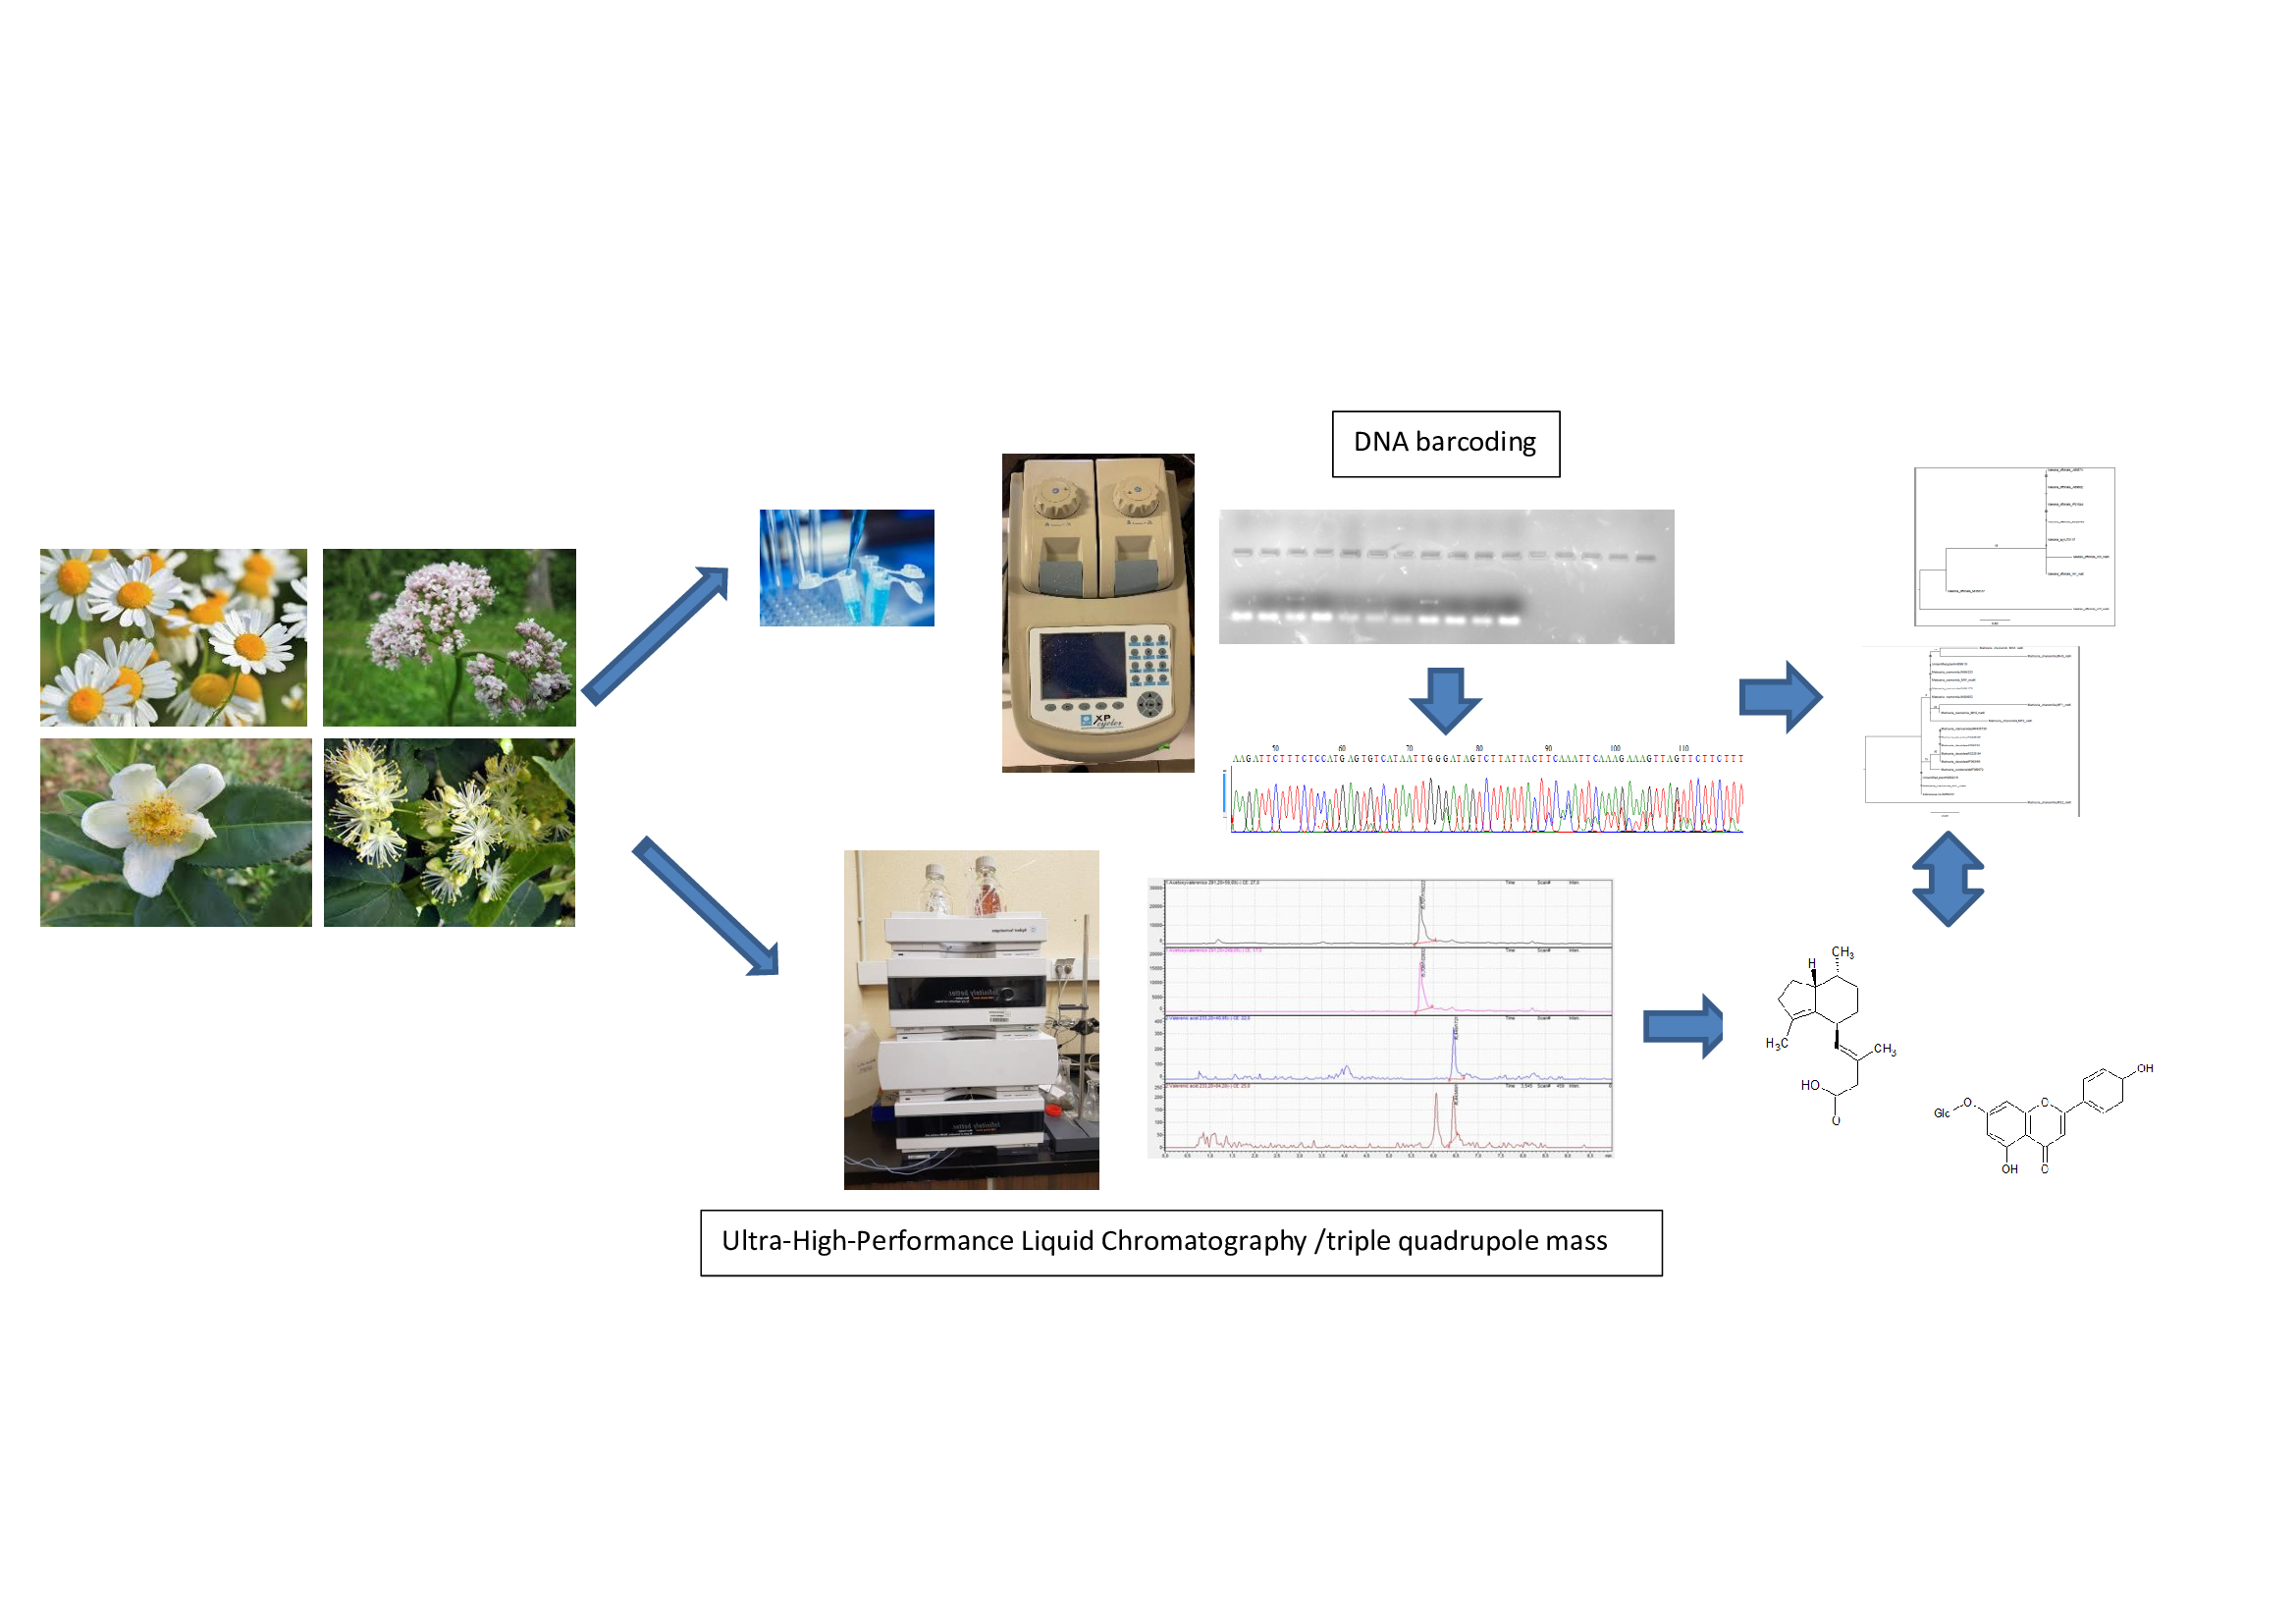 Plants | Free Full-Text | DNA-Based Authentication and Metabolomics  Analysis of Medicinal Plants Samples by DNA Barcoding and  Ultra-High-Performance Liquid Chromatography/Triple Quadrupole Mass  Spectrometry (UHPLC-MS) | HTML